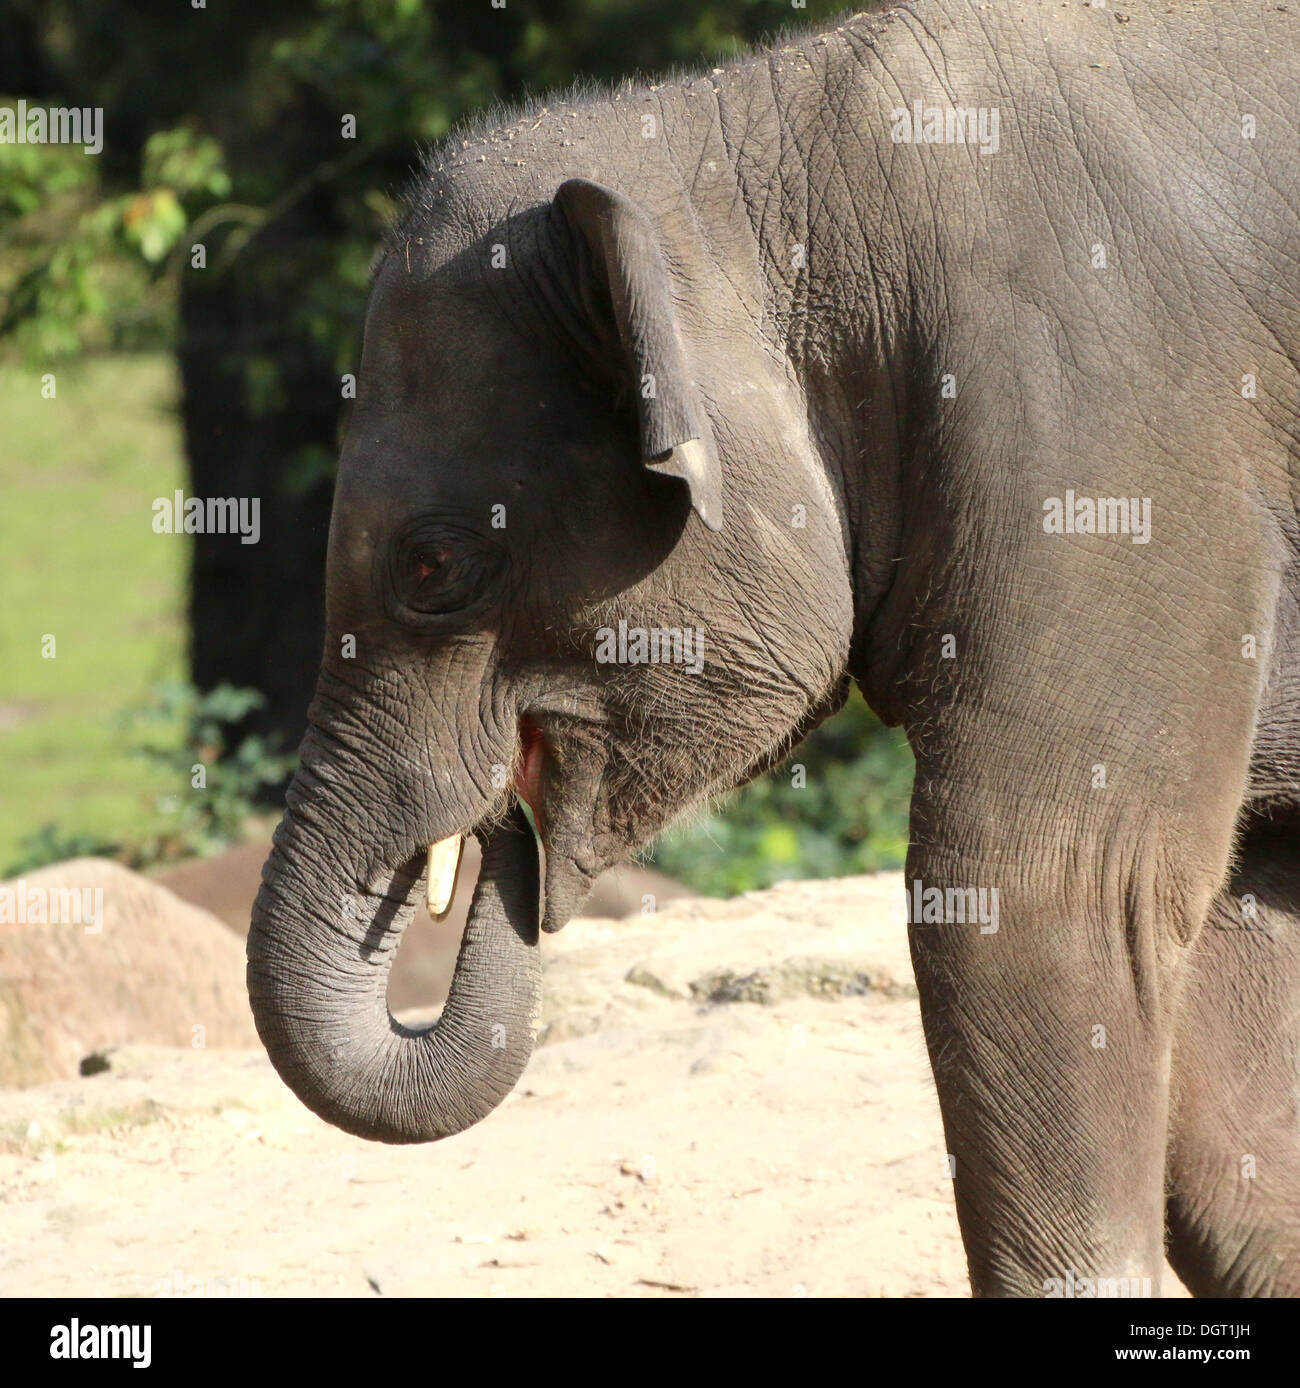 Asian elephant (Elephas maximus) eating, trunk in mouth Stock Photo